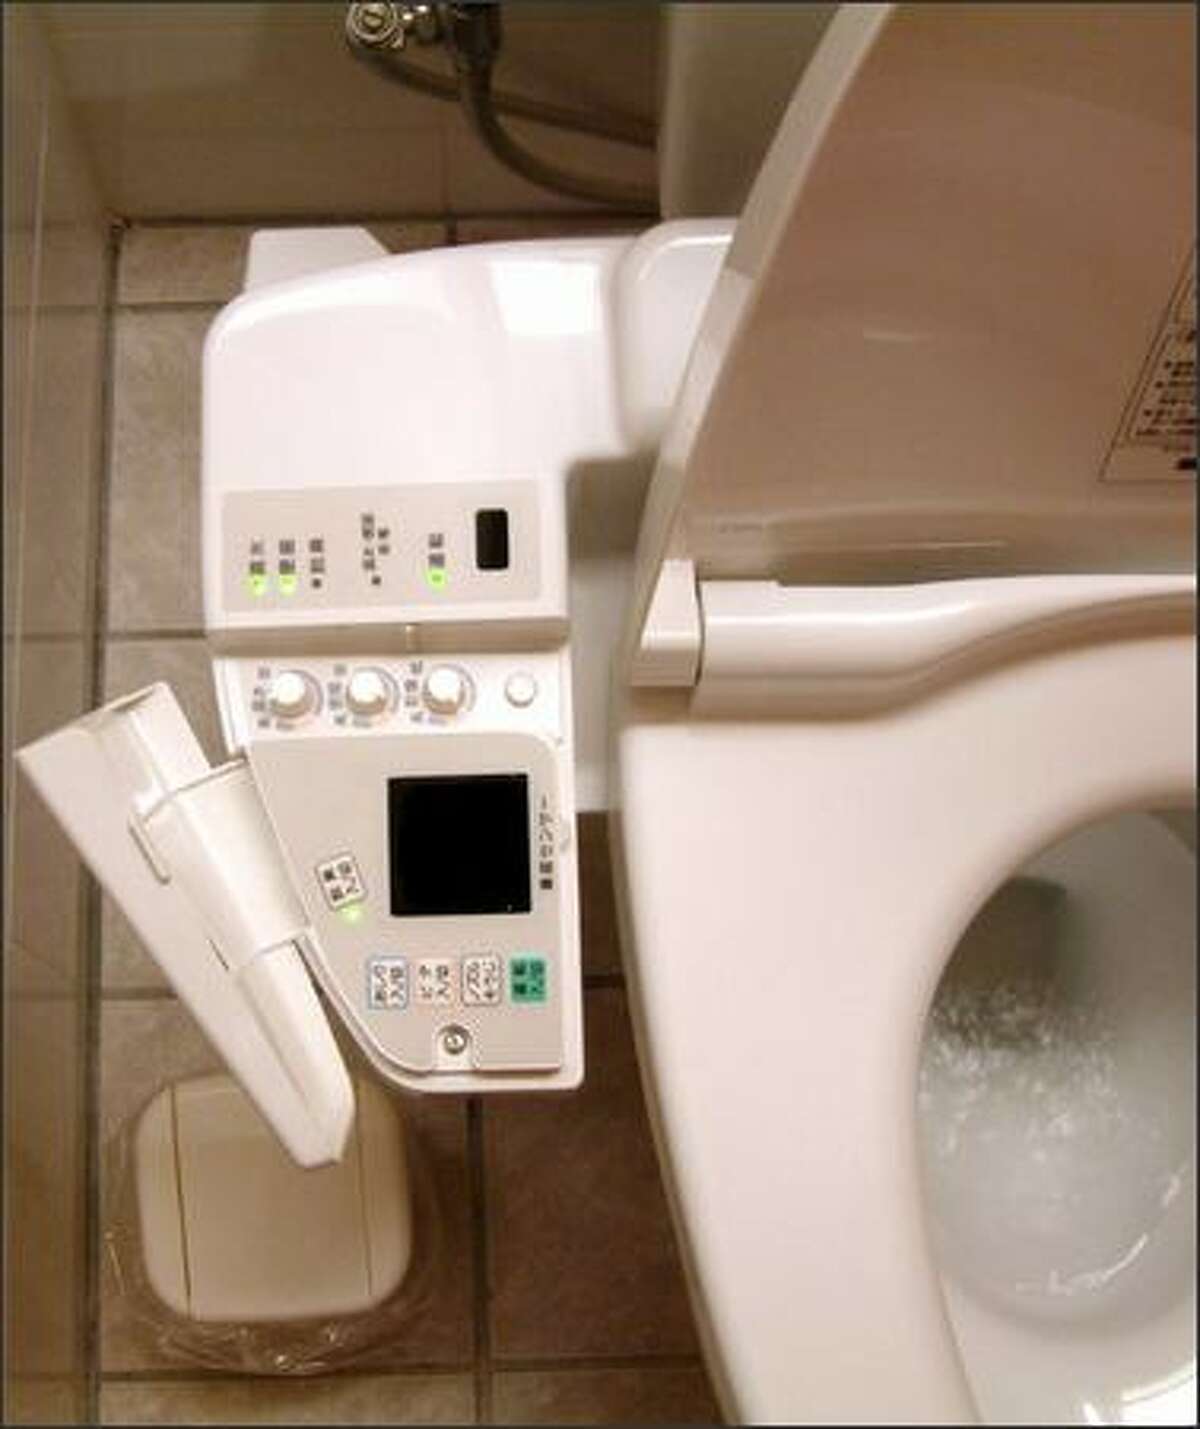 Japan's futuristic commodes give visitors a high-tech ride.